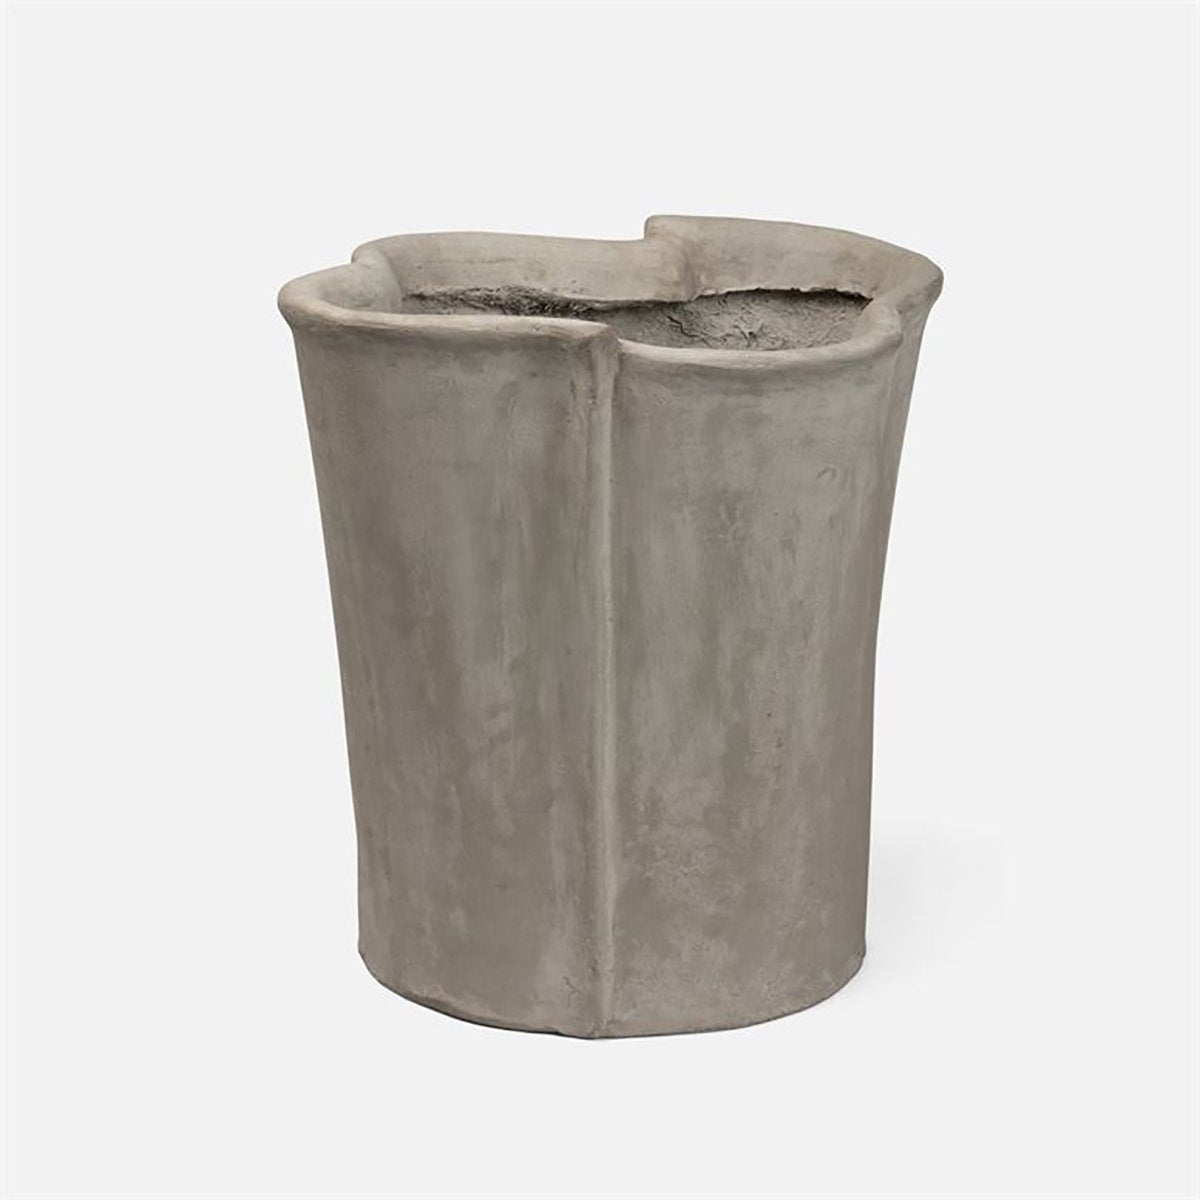 Made Goods Seth Reconstituted Stone Outdoor Planter